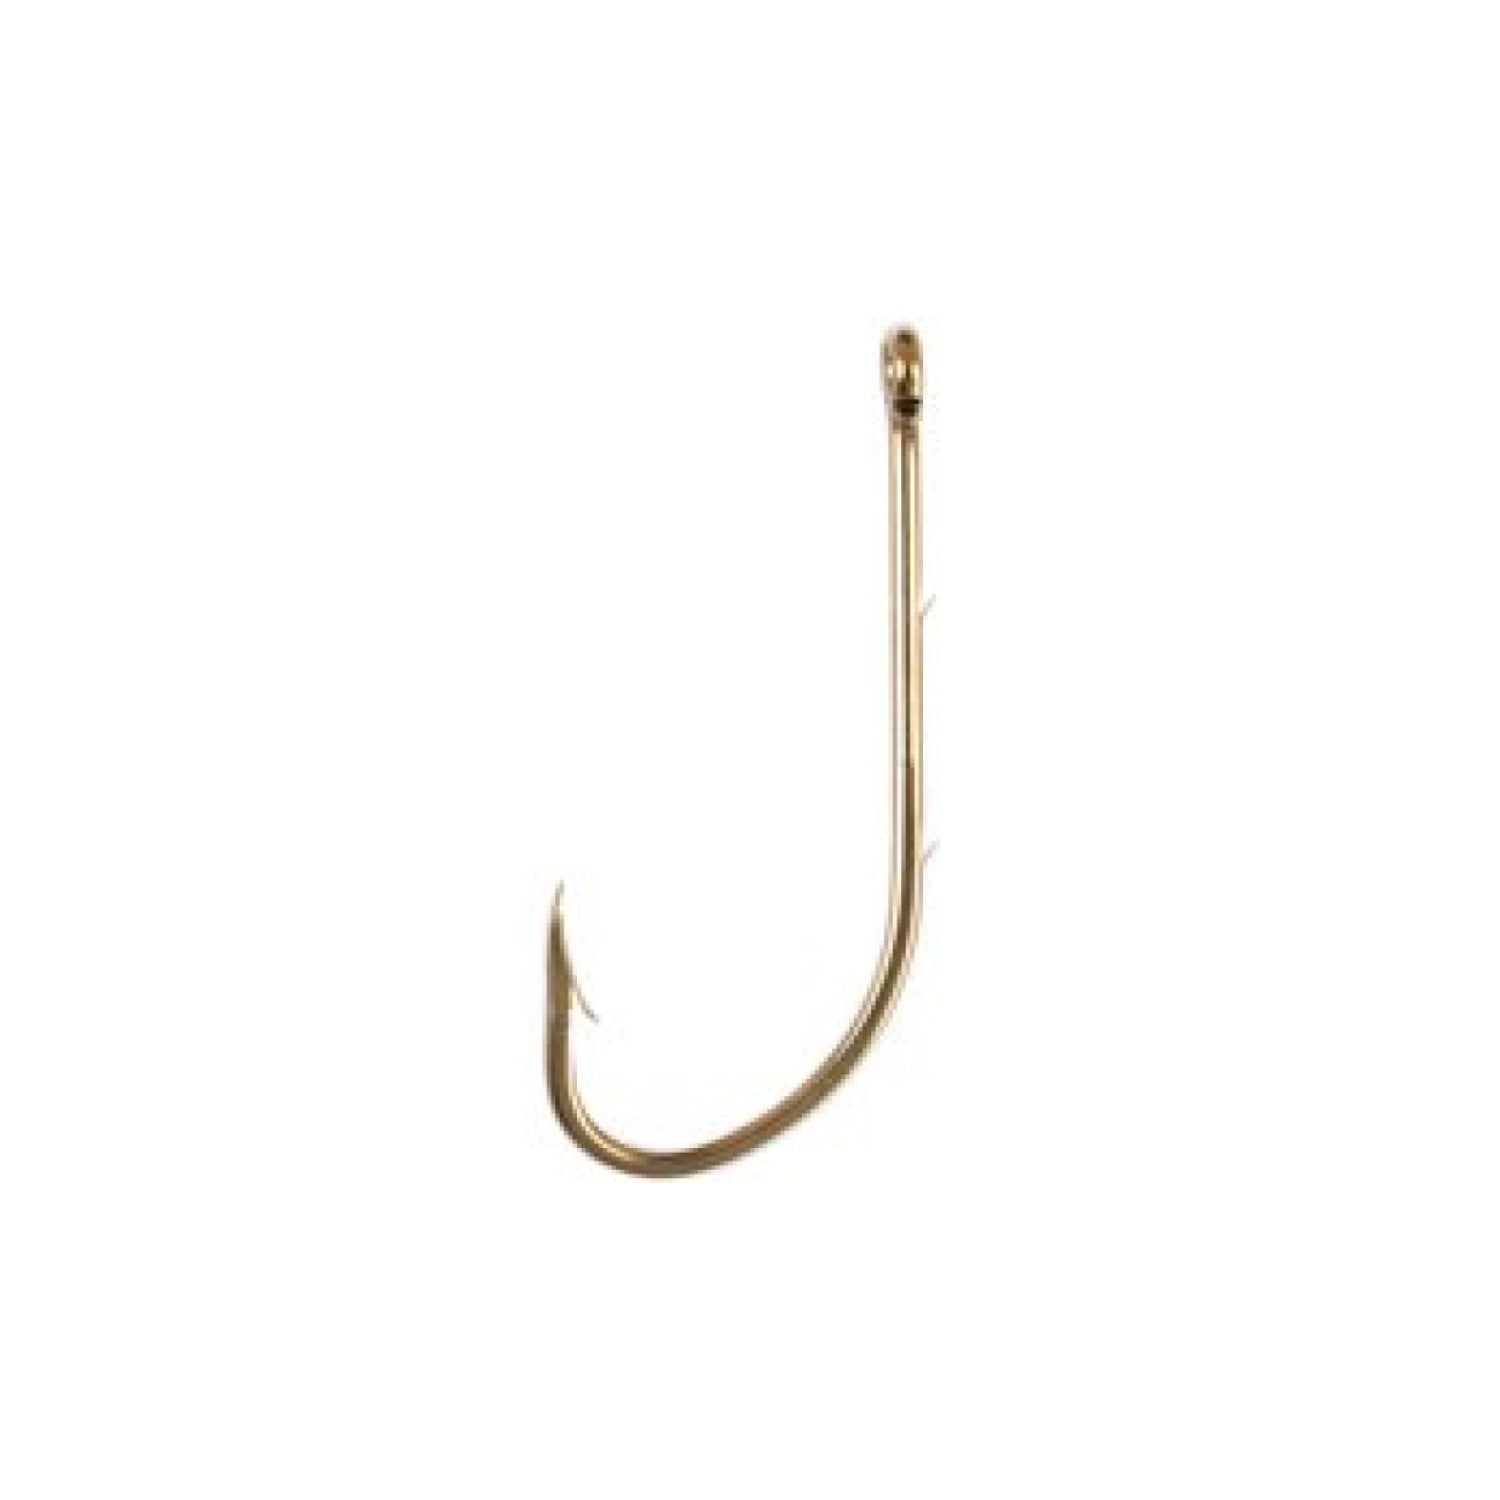 Eagle Claw Ringeye Bthldr Hooks 10P Size2 – The Infidel Co